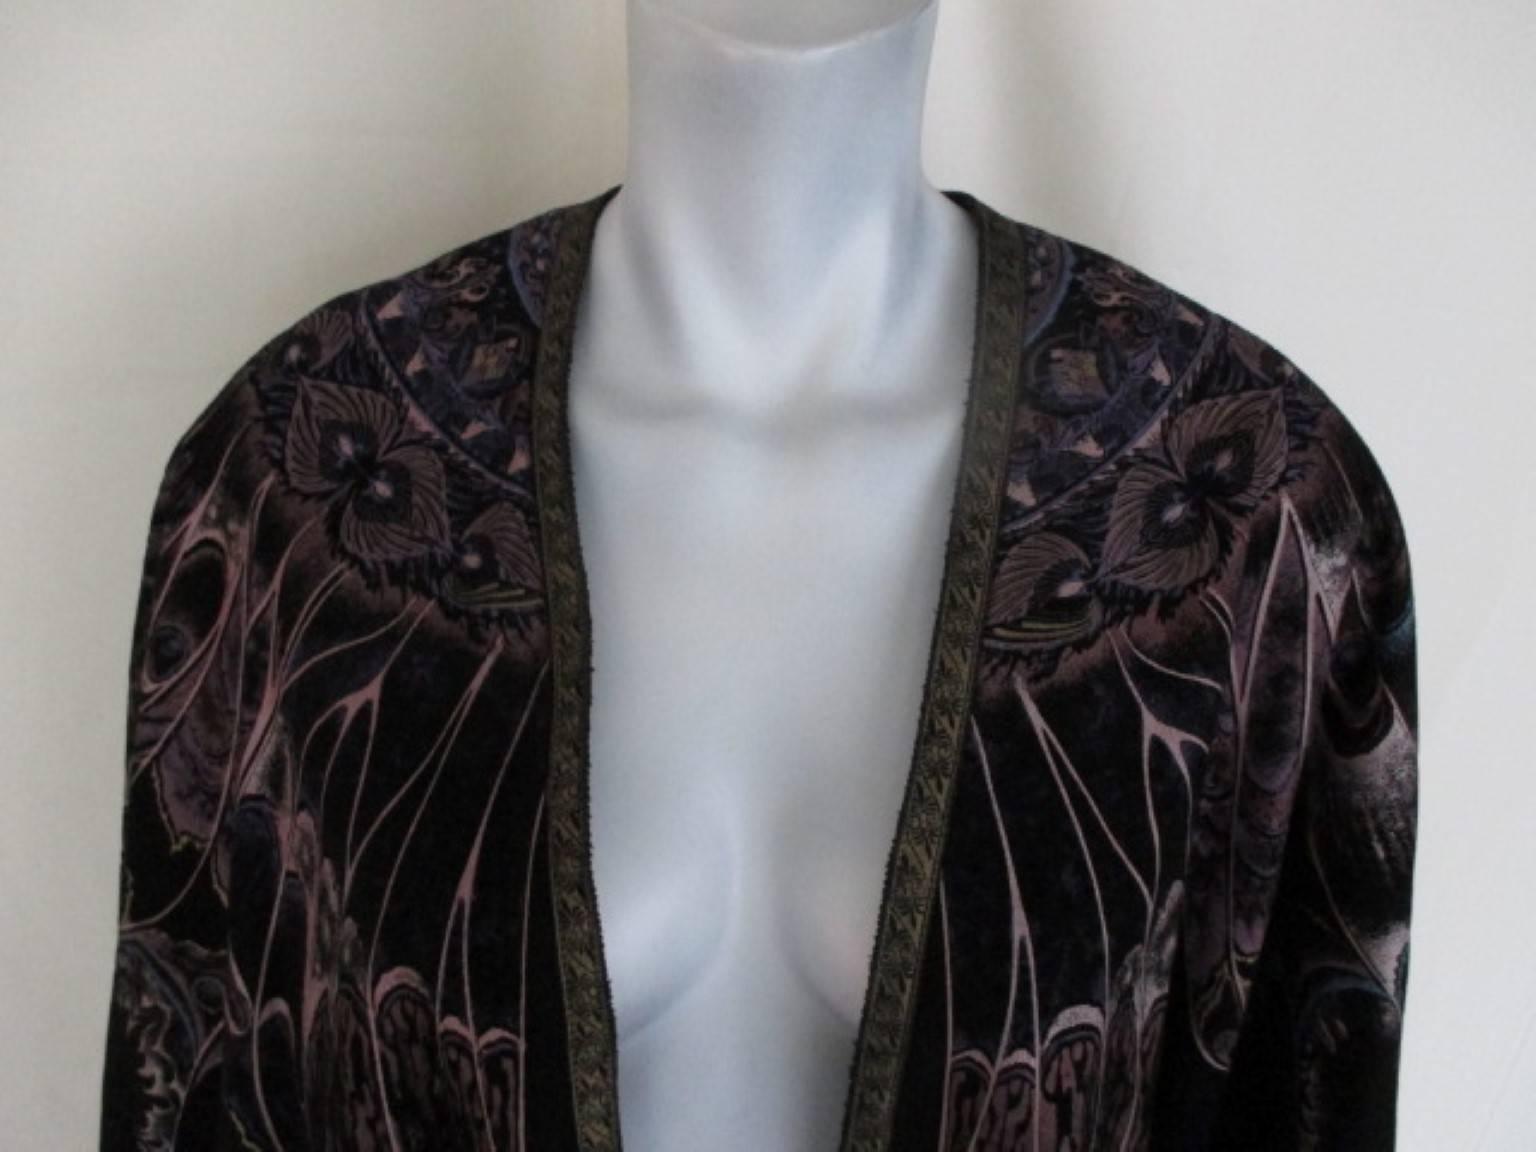 Very few 1970's Roberto Cavalli leather capes of this period turn up for sale.
The under layer is black velvet with on top the suede print piece.
The condition of this cape is excellent. There are a few natural flaws in the suède that may have been